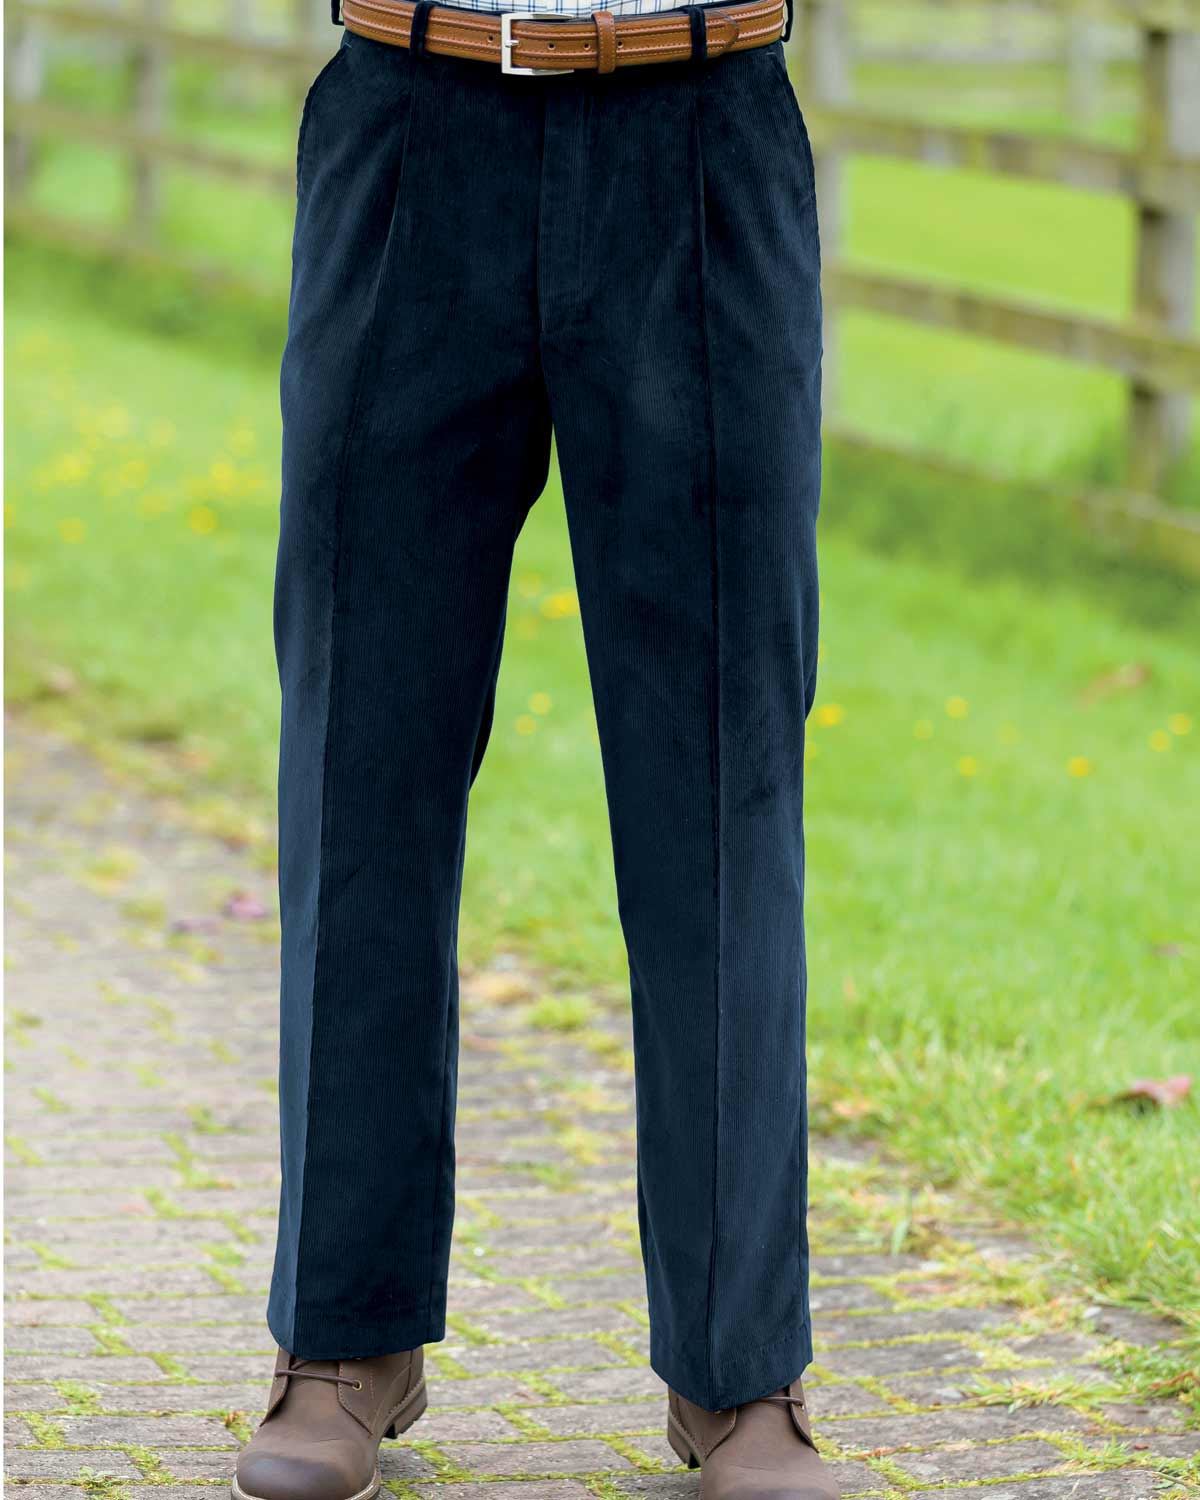 Mens corduroy trousers available in 8 Colours. Sizes 32-44